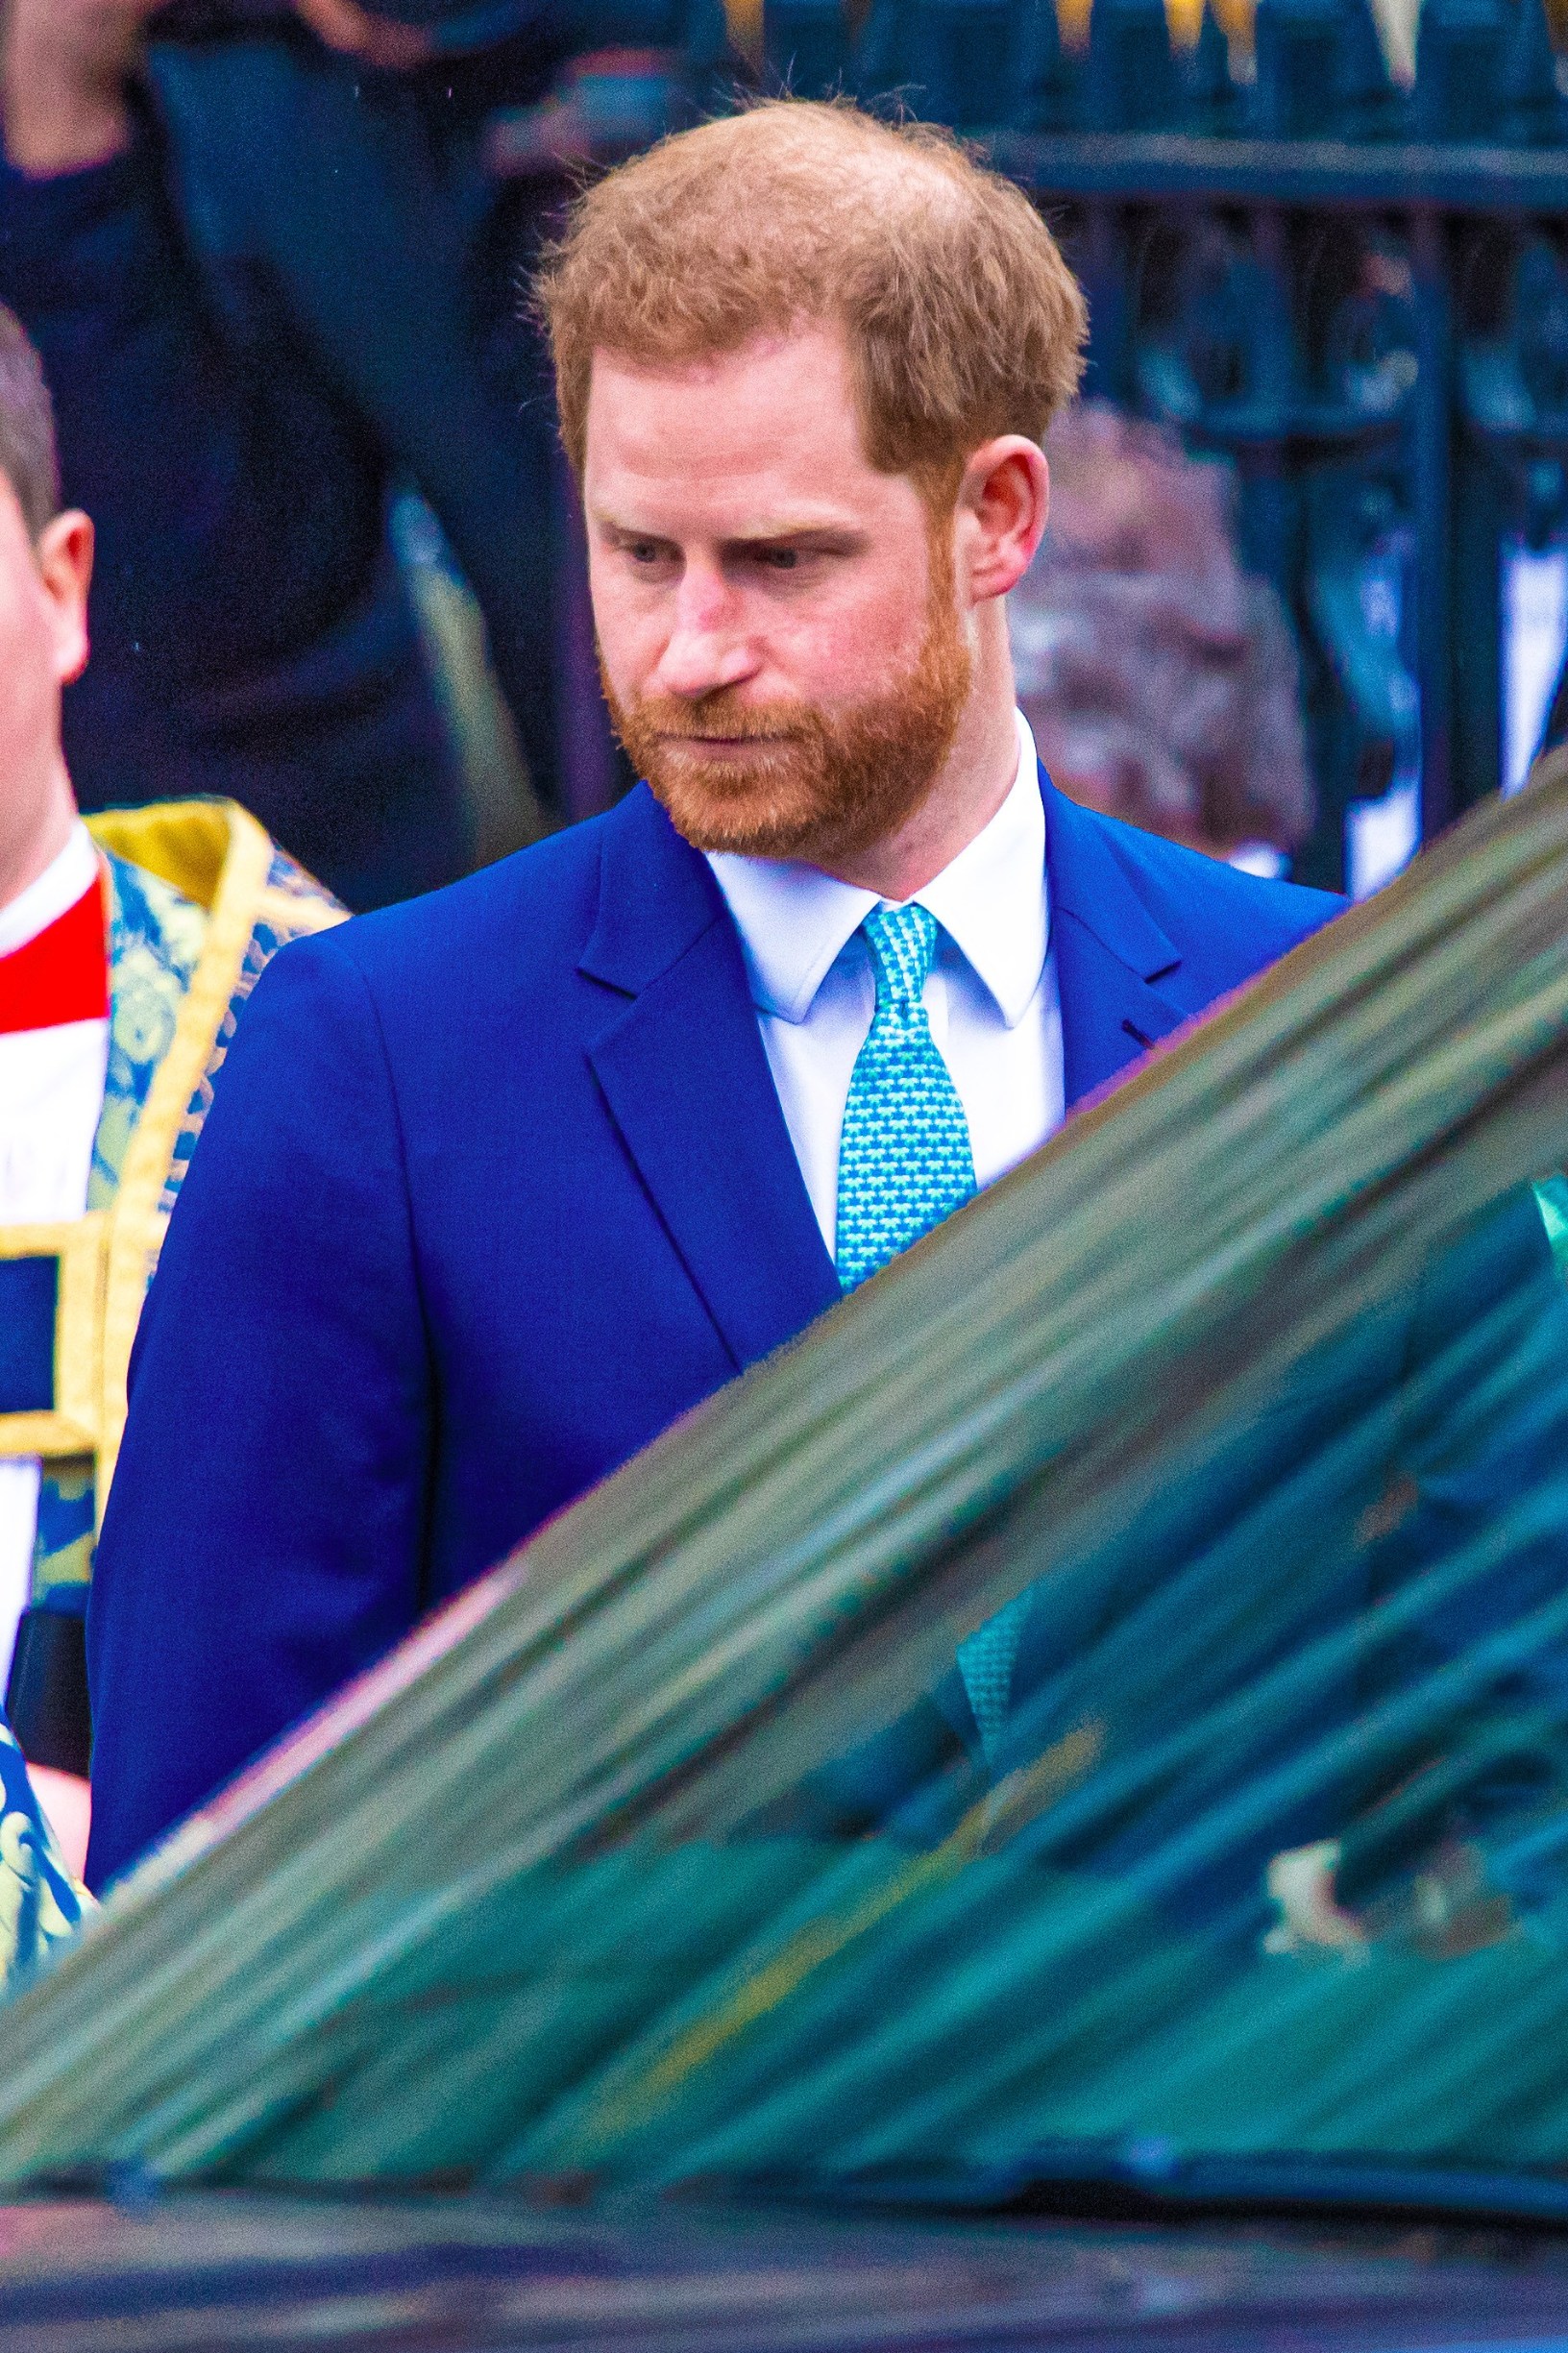 English Royals attending the annual Commonwealth Day Service at Westminster Abbey in London.
09 Mar 2020, Image: 504942812, License: Rights-managed, Restrictions: NO Netherlands, Model Release: no, Credit line: MEGA / The Mega Agency / Profimedia